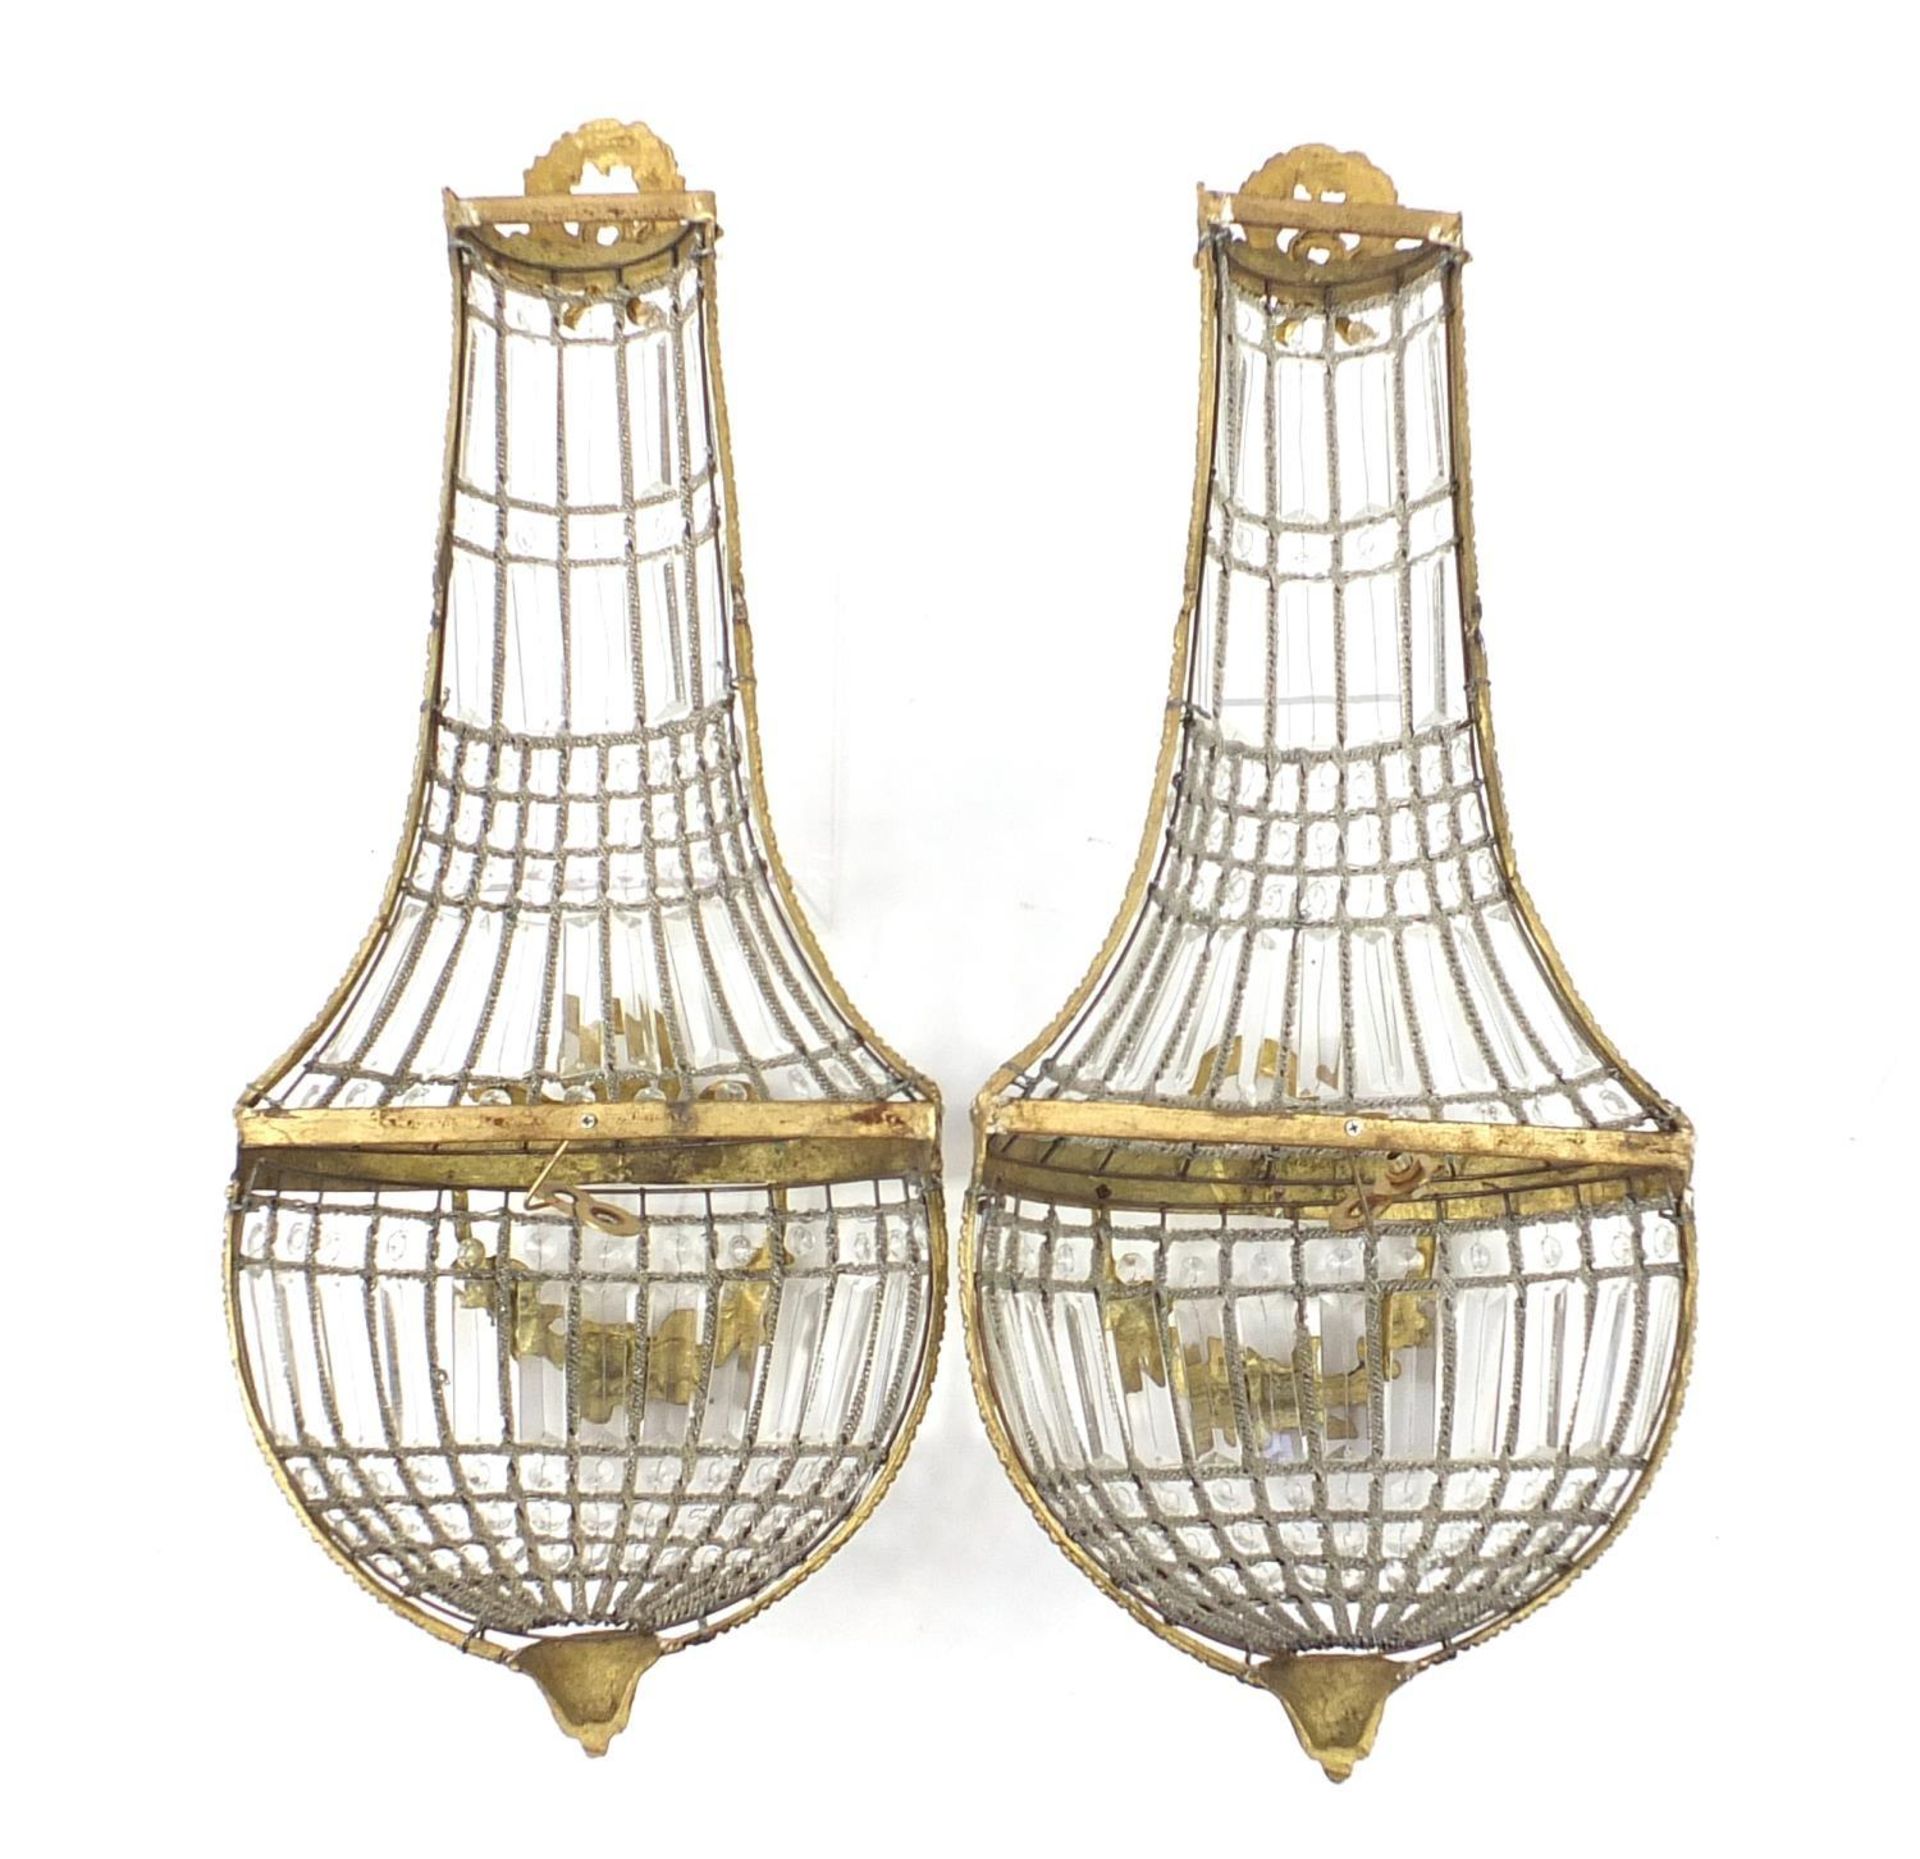 Pair of ornate gilt metal chandelier design wall sconces with bow design, each 71cm high - Image 2 of 2